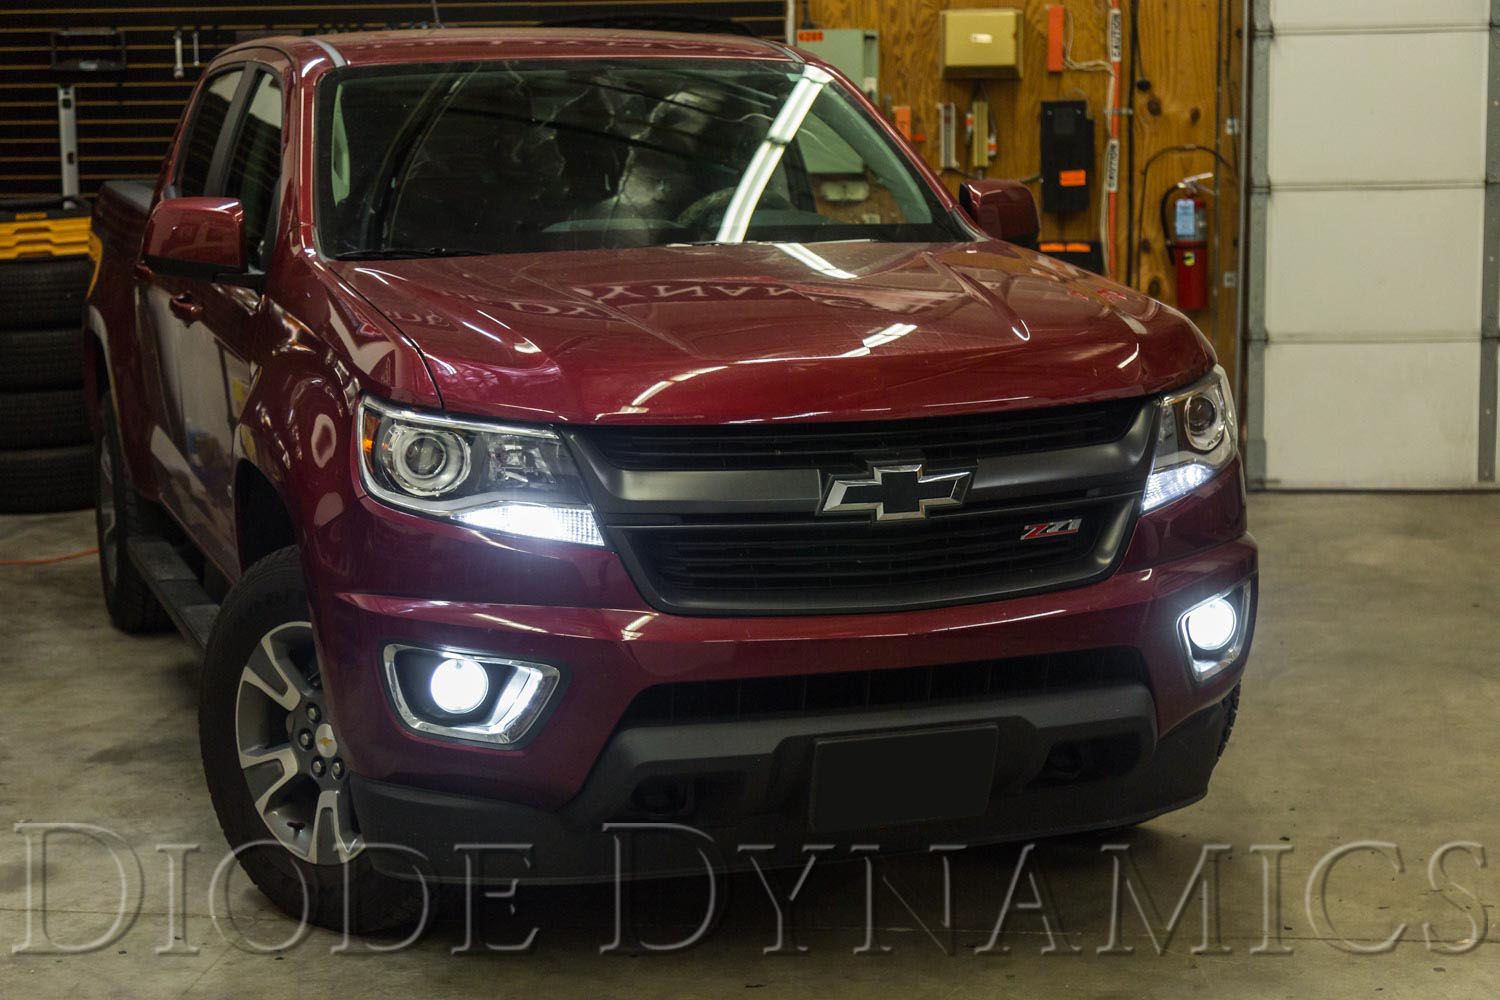 Top LED Lighting Upgrades for the 2015-2020 Chevrolet Colorado